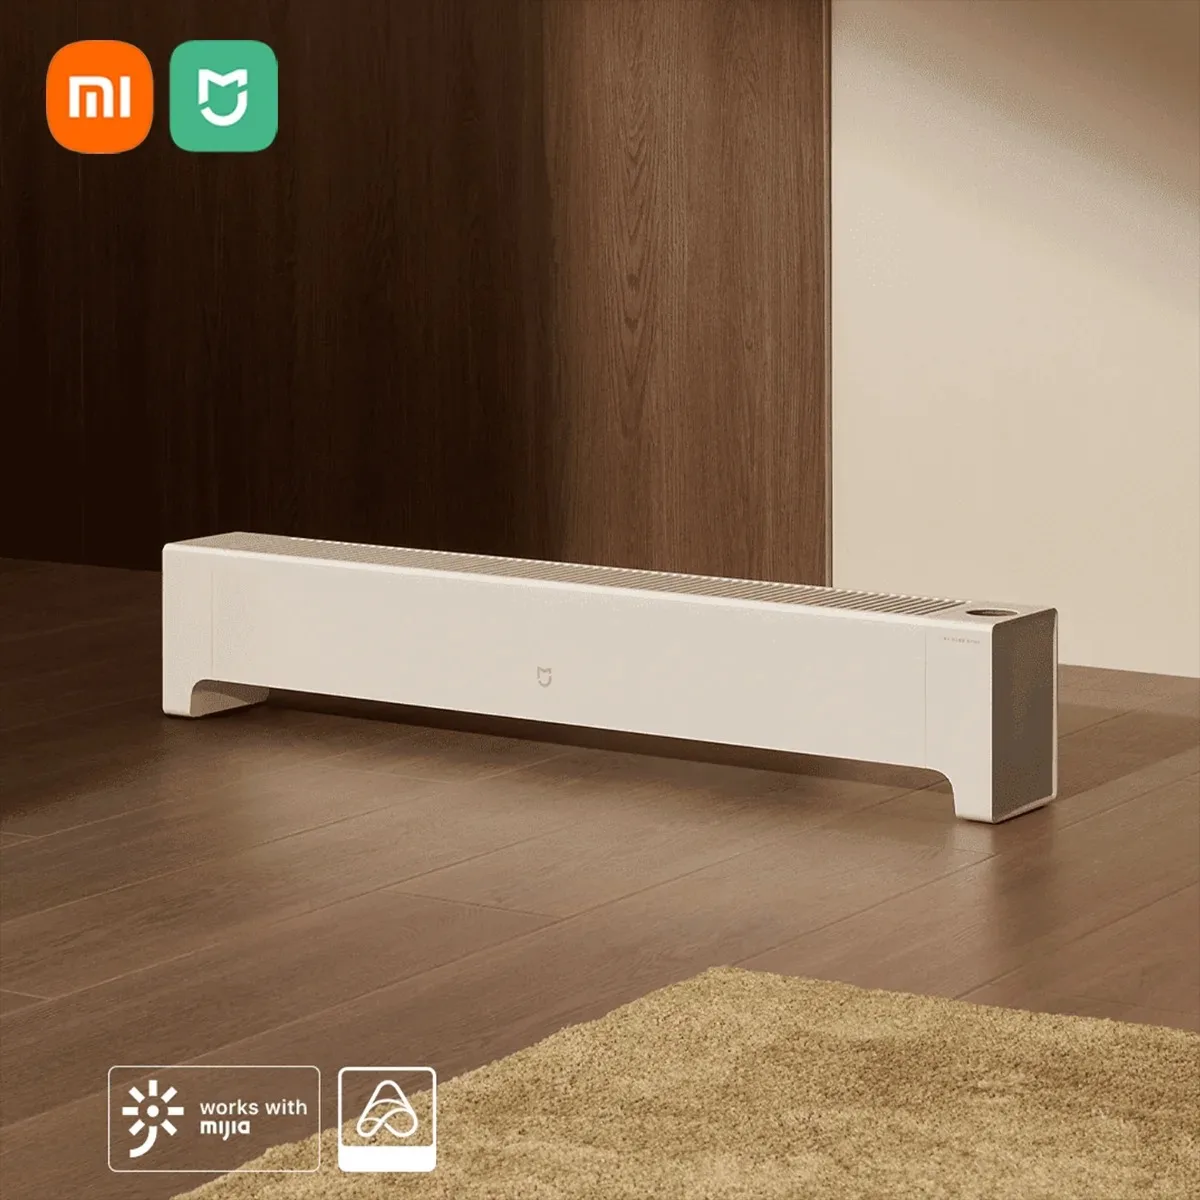 

XIAOMI MIJIA Graphene Baseboard Electric Heater 2 Winter Household 2200W 5S Fast Heating Smarter Temperature Control Home Heater